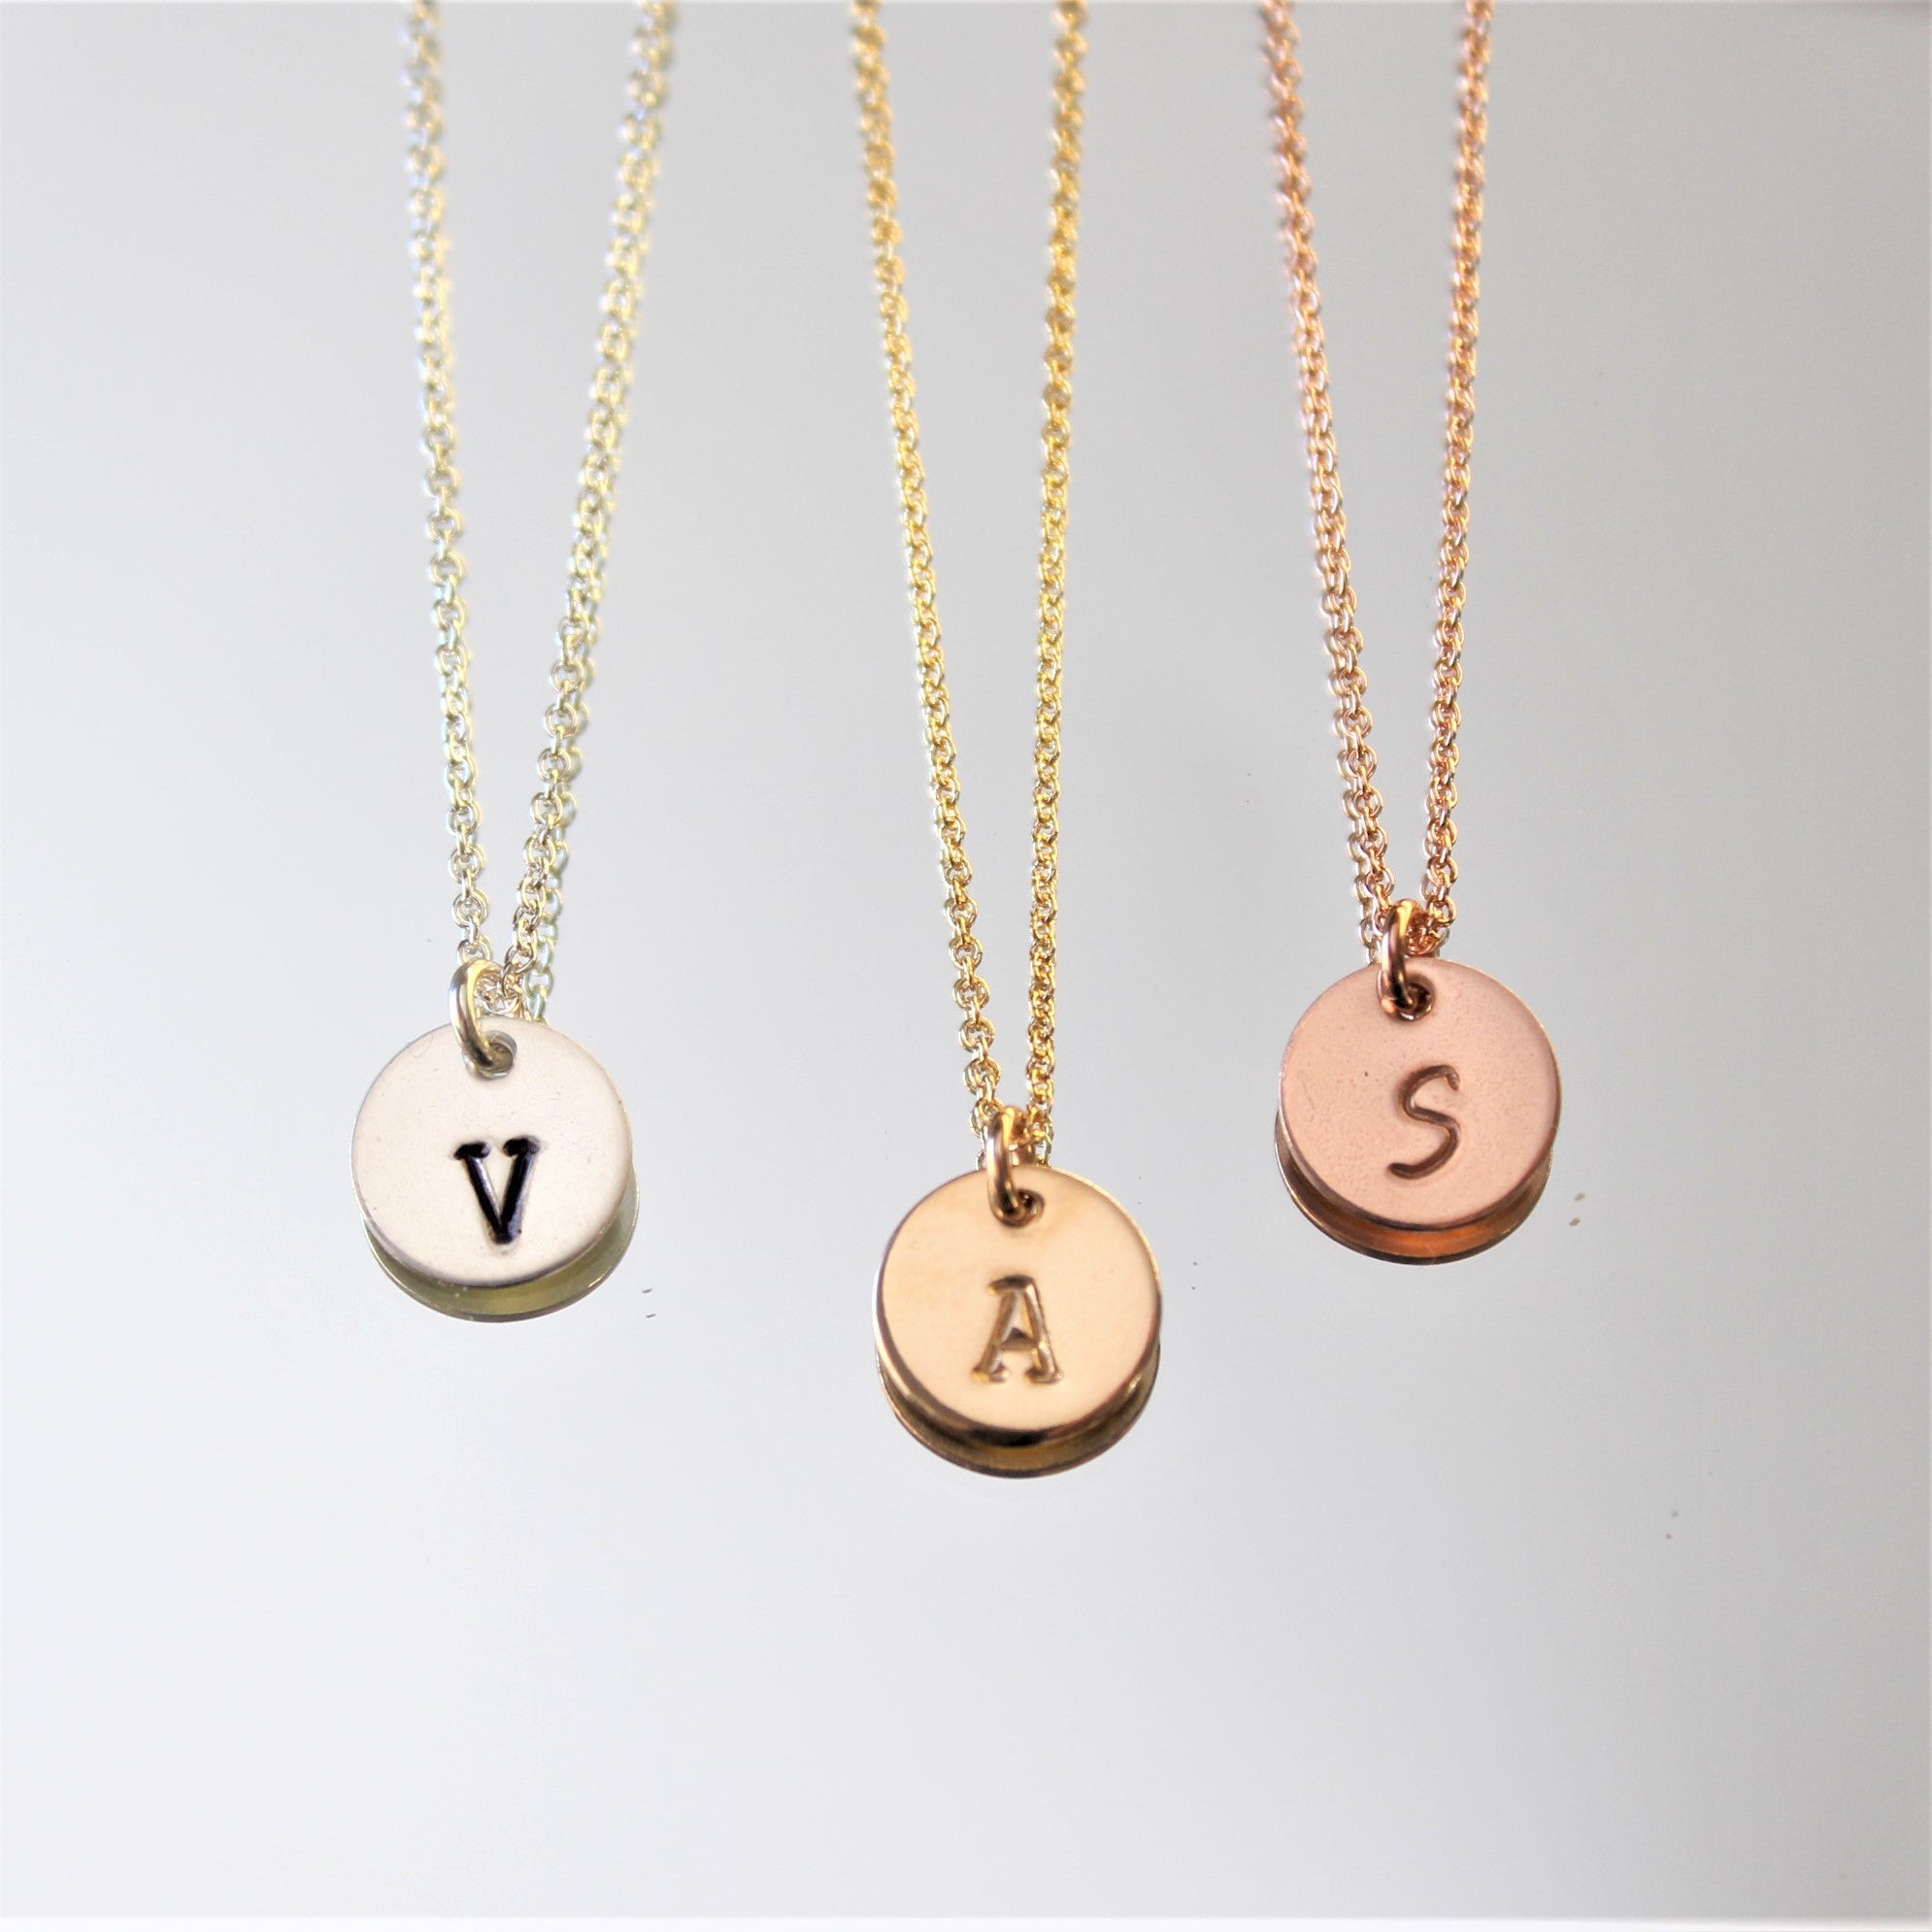 Initials Necklace – Silver Statements